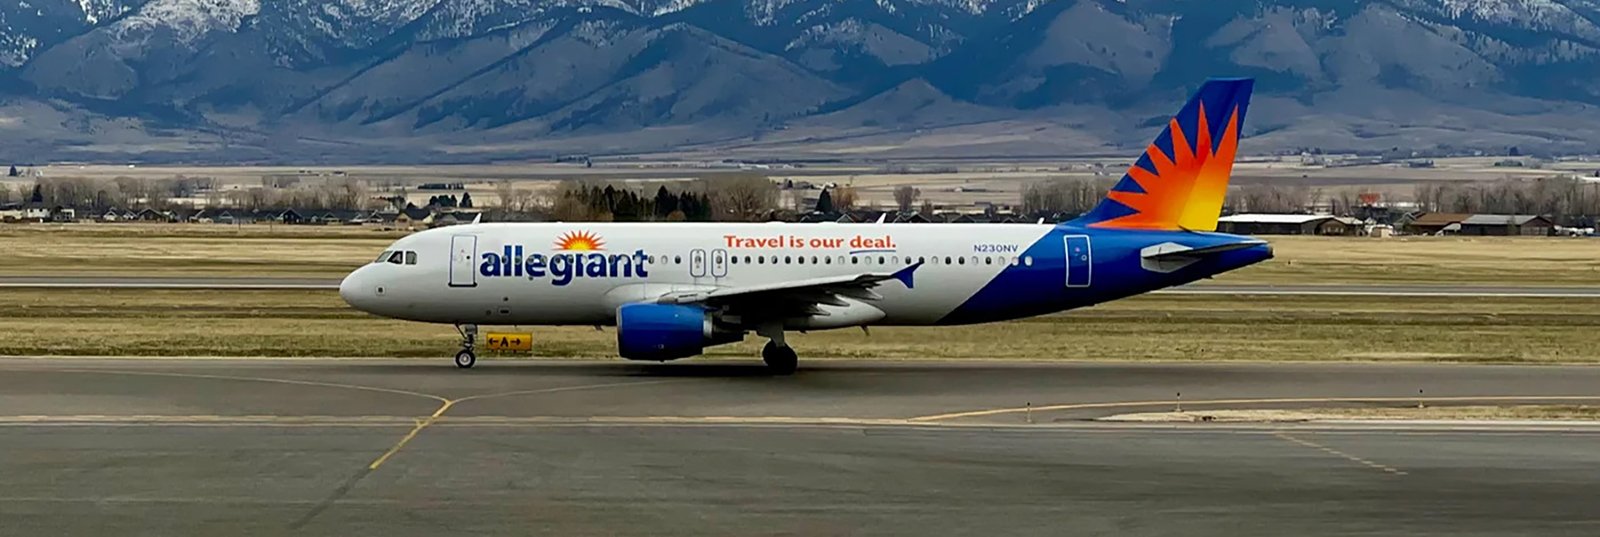 Side view of an Allegiant commercial airline Airbus A319/320.